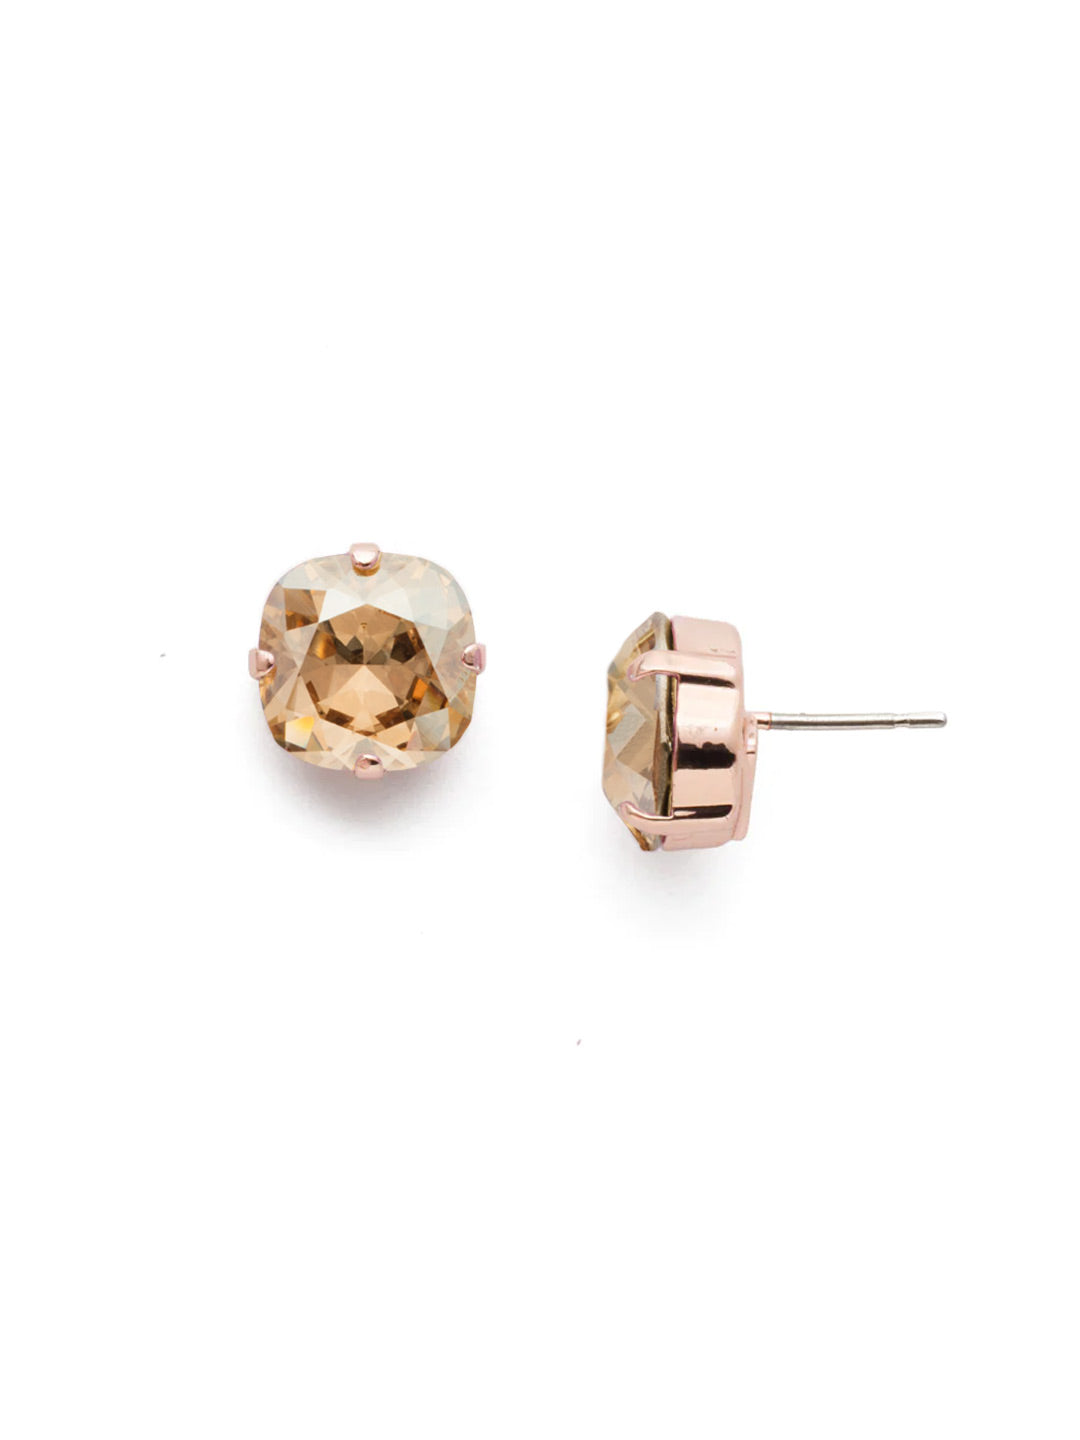 Halcyon Stud Earrings - EDH25RGDCH - <p>A beautiful, luminous cushion-cut crystal in a classic four-pronged setting that's ideal for everyday wear. From Sorrelli's Dark Champagne collection in our Rose Gold-tone finish.</p>